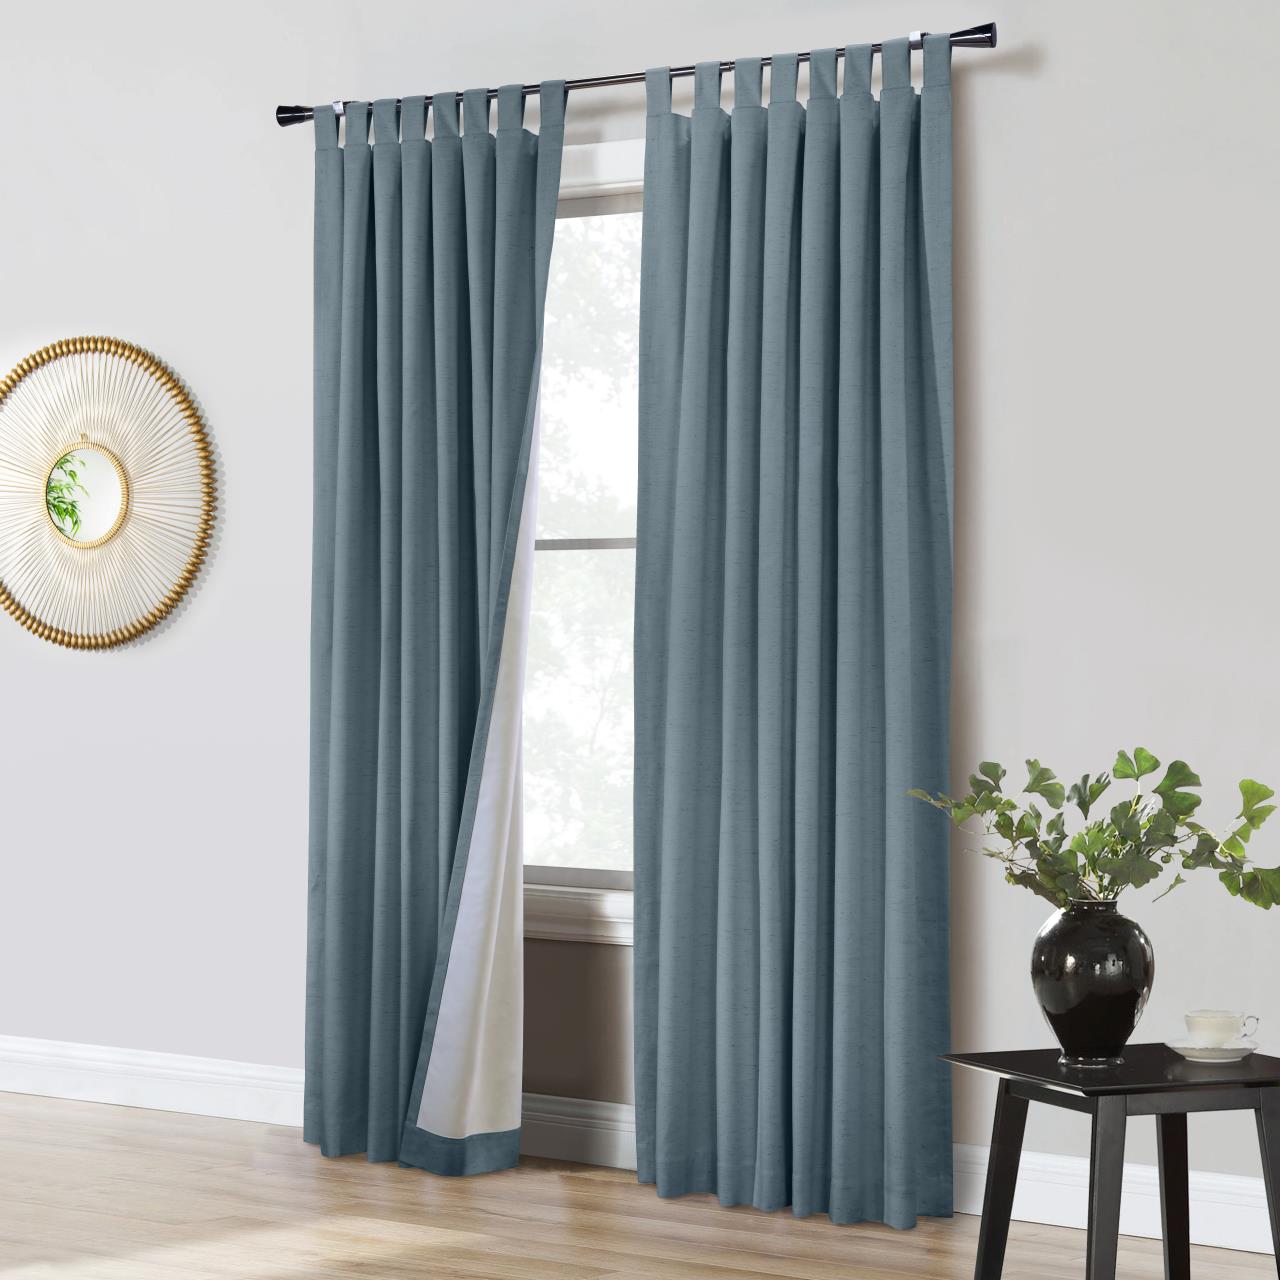 Ventura Thermaplus Tab Top Blackout Curtain Pair by Commonwealth |Paul's  Home Fashions